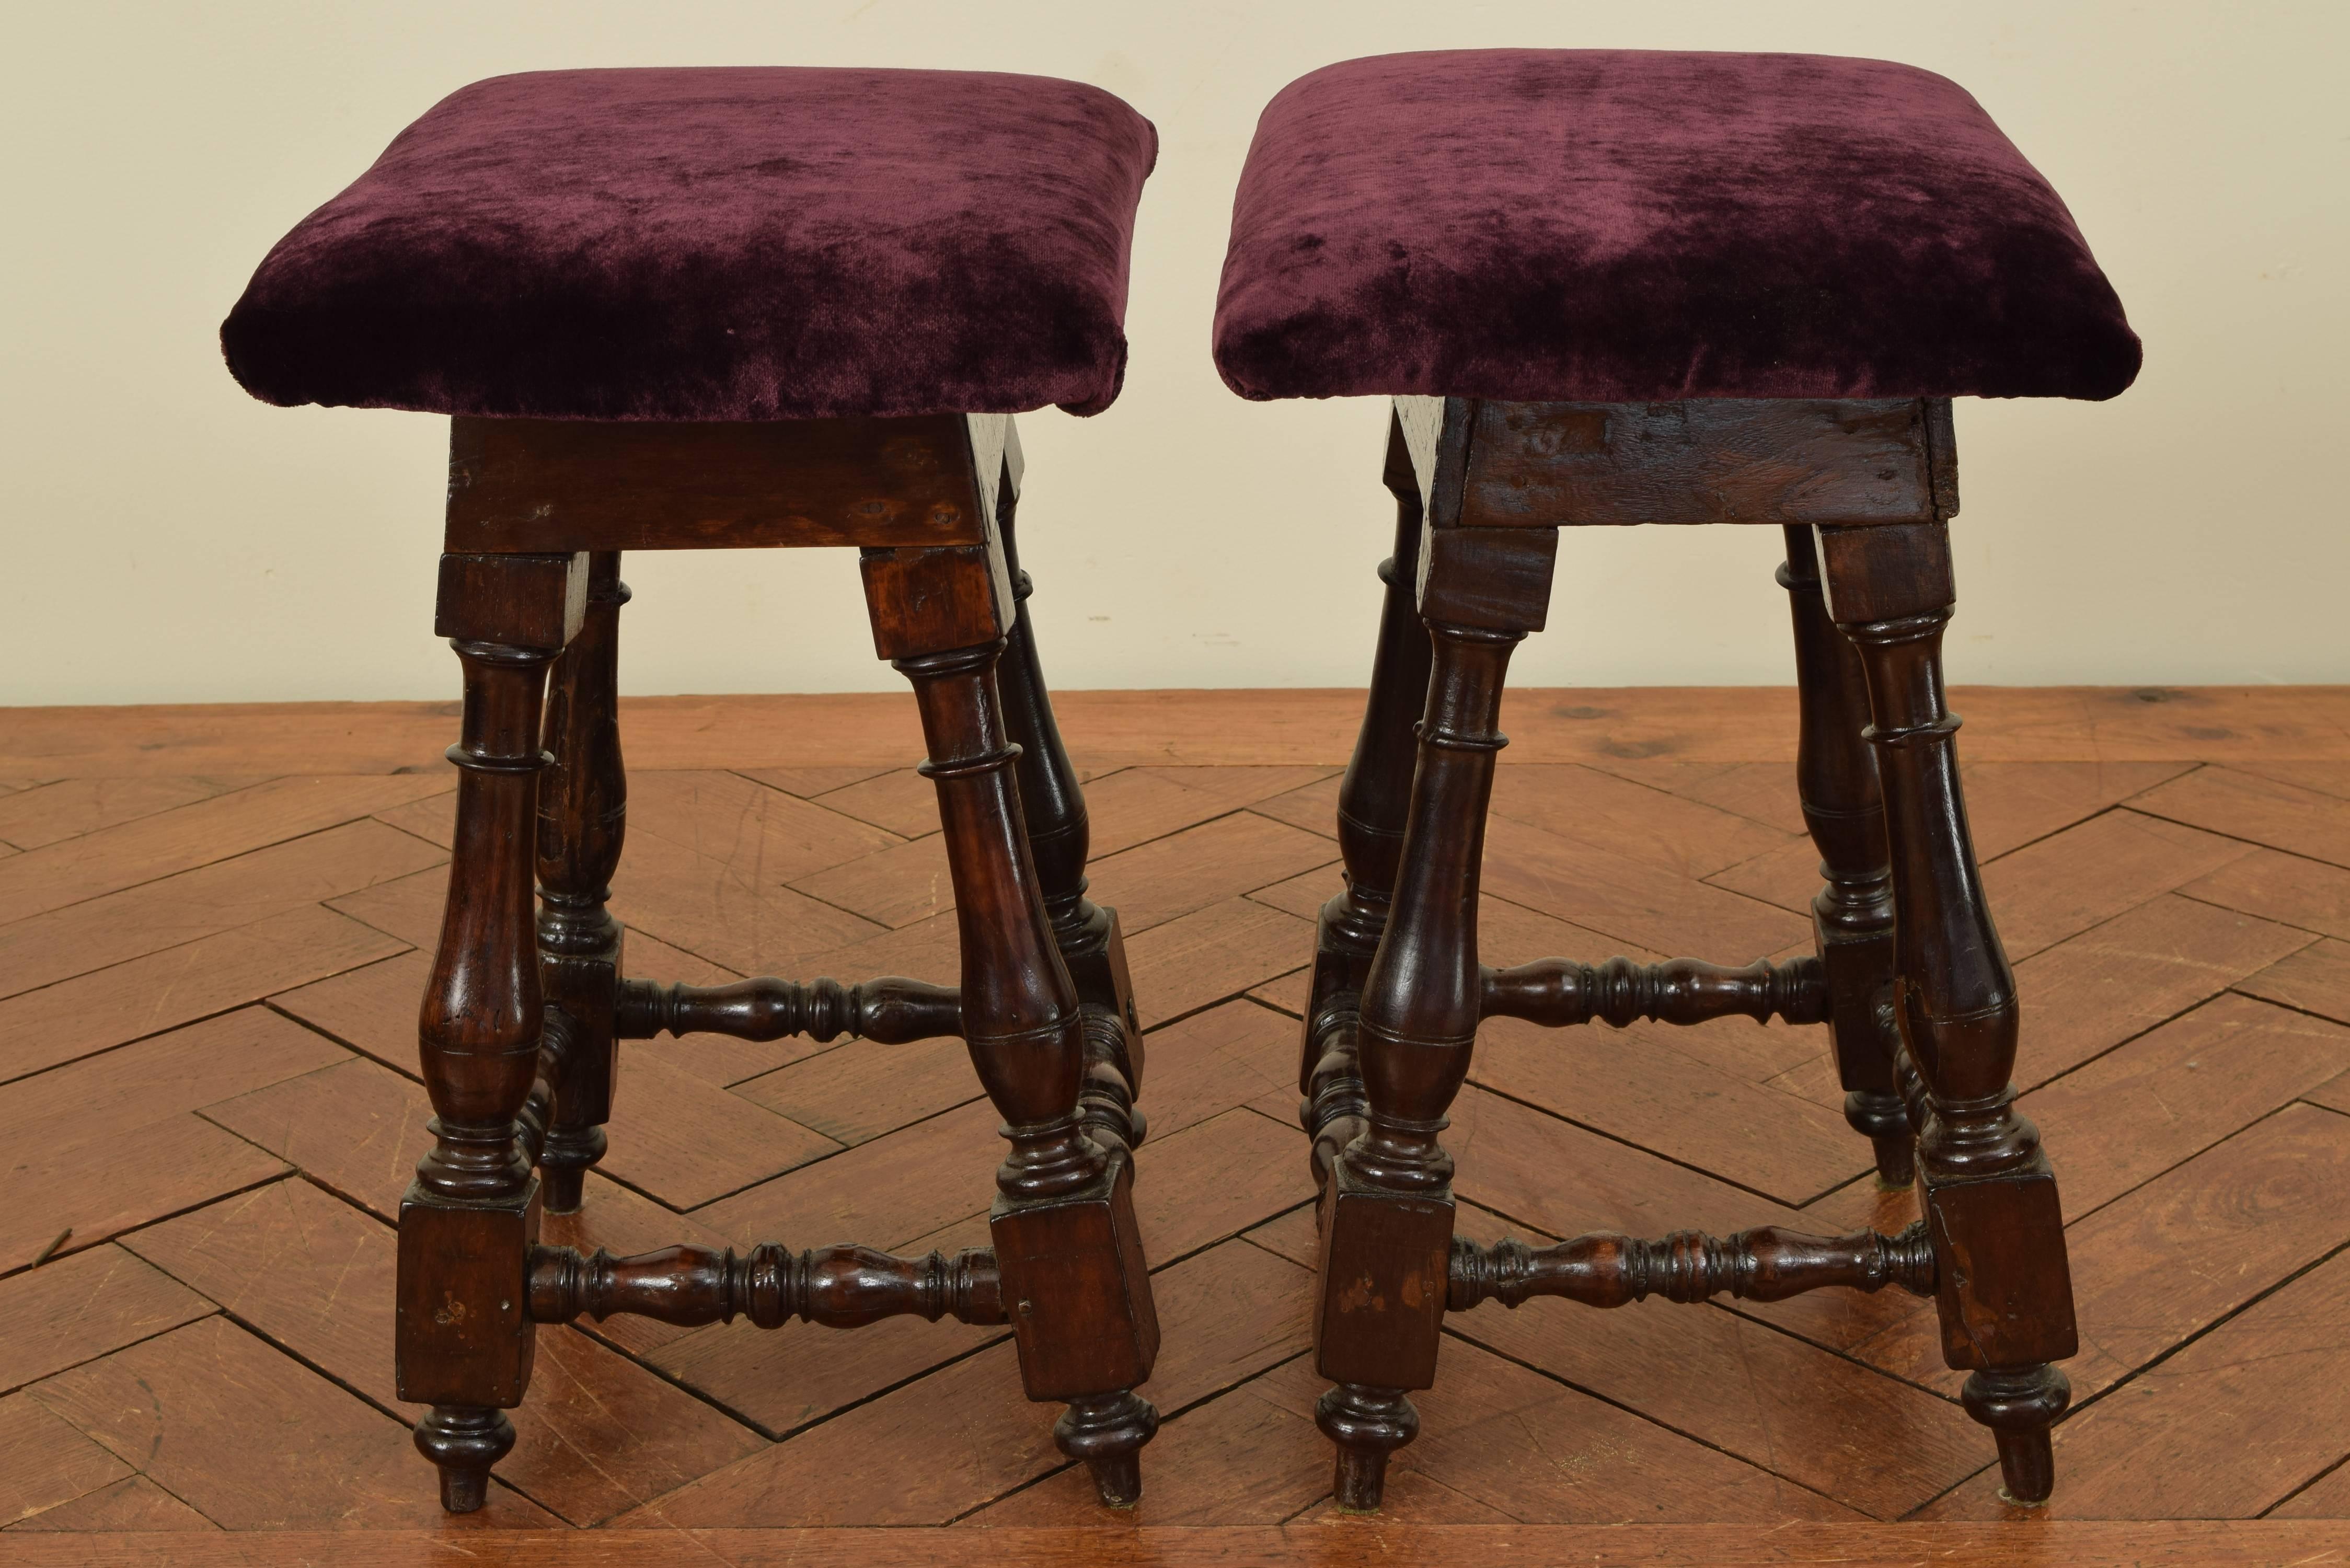 The rectangular tops upholstered in purple velvet and raised on slanted turned legs connected by turned stretchers, tapered feet.